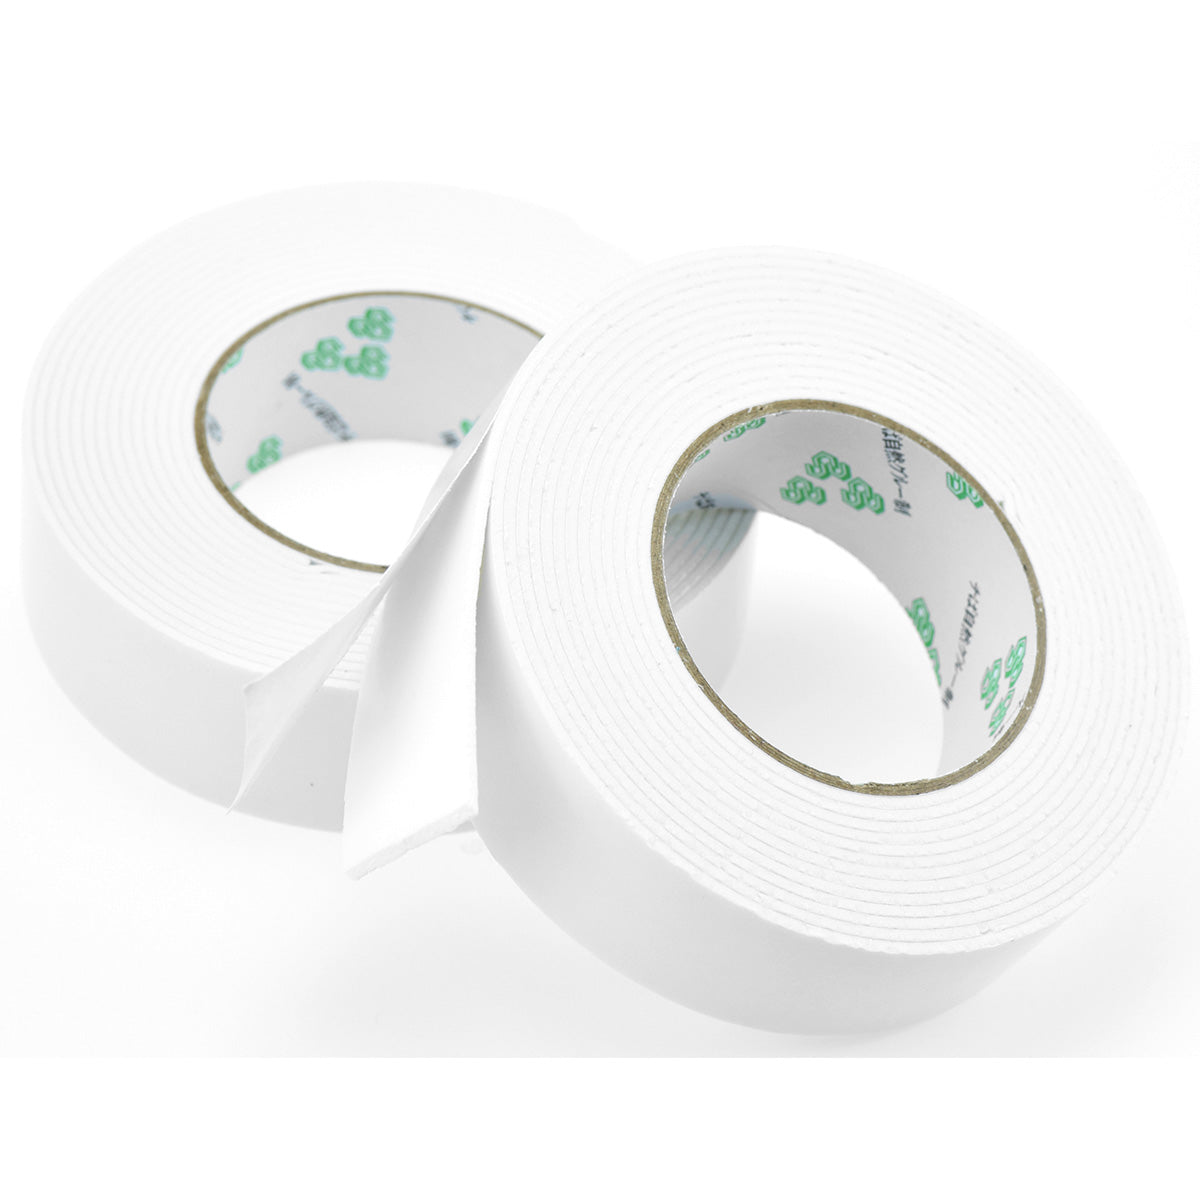 Pack of 2 Double Sided White Foam Tape Very Sticky Leaves Residue